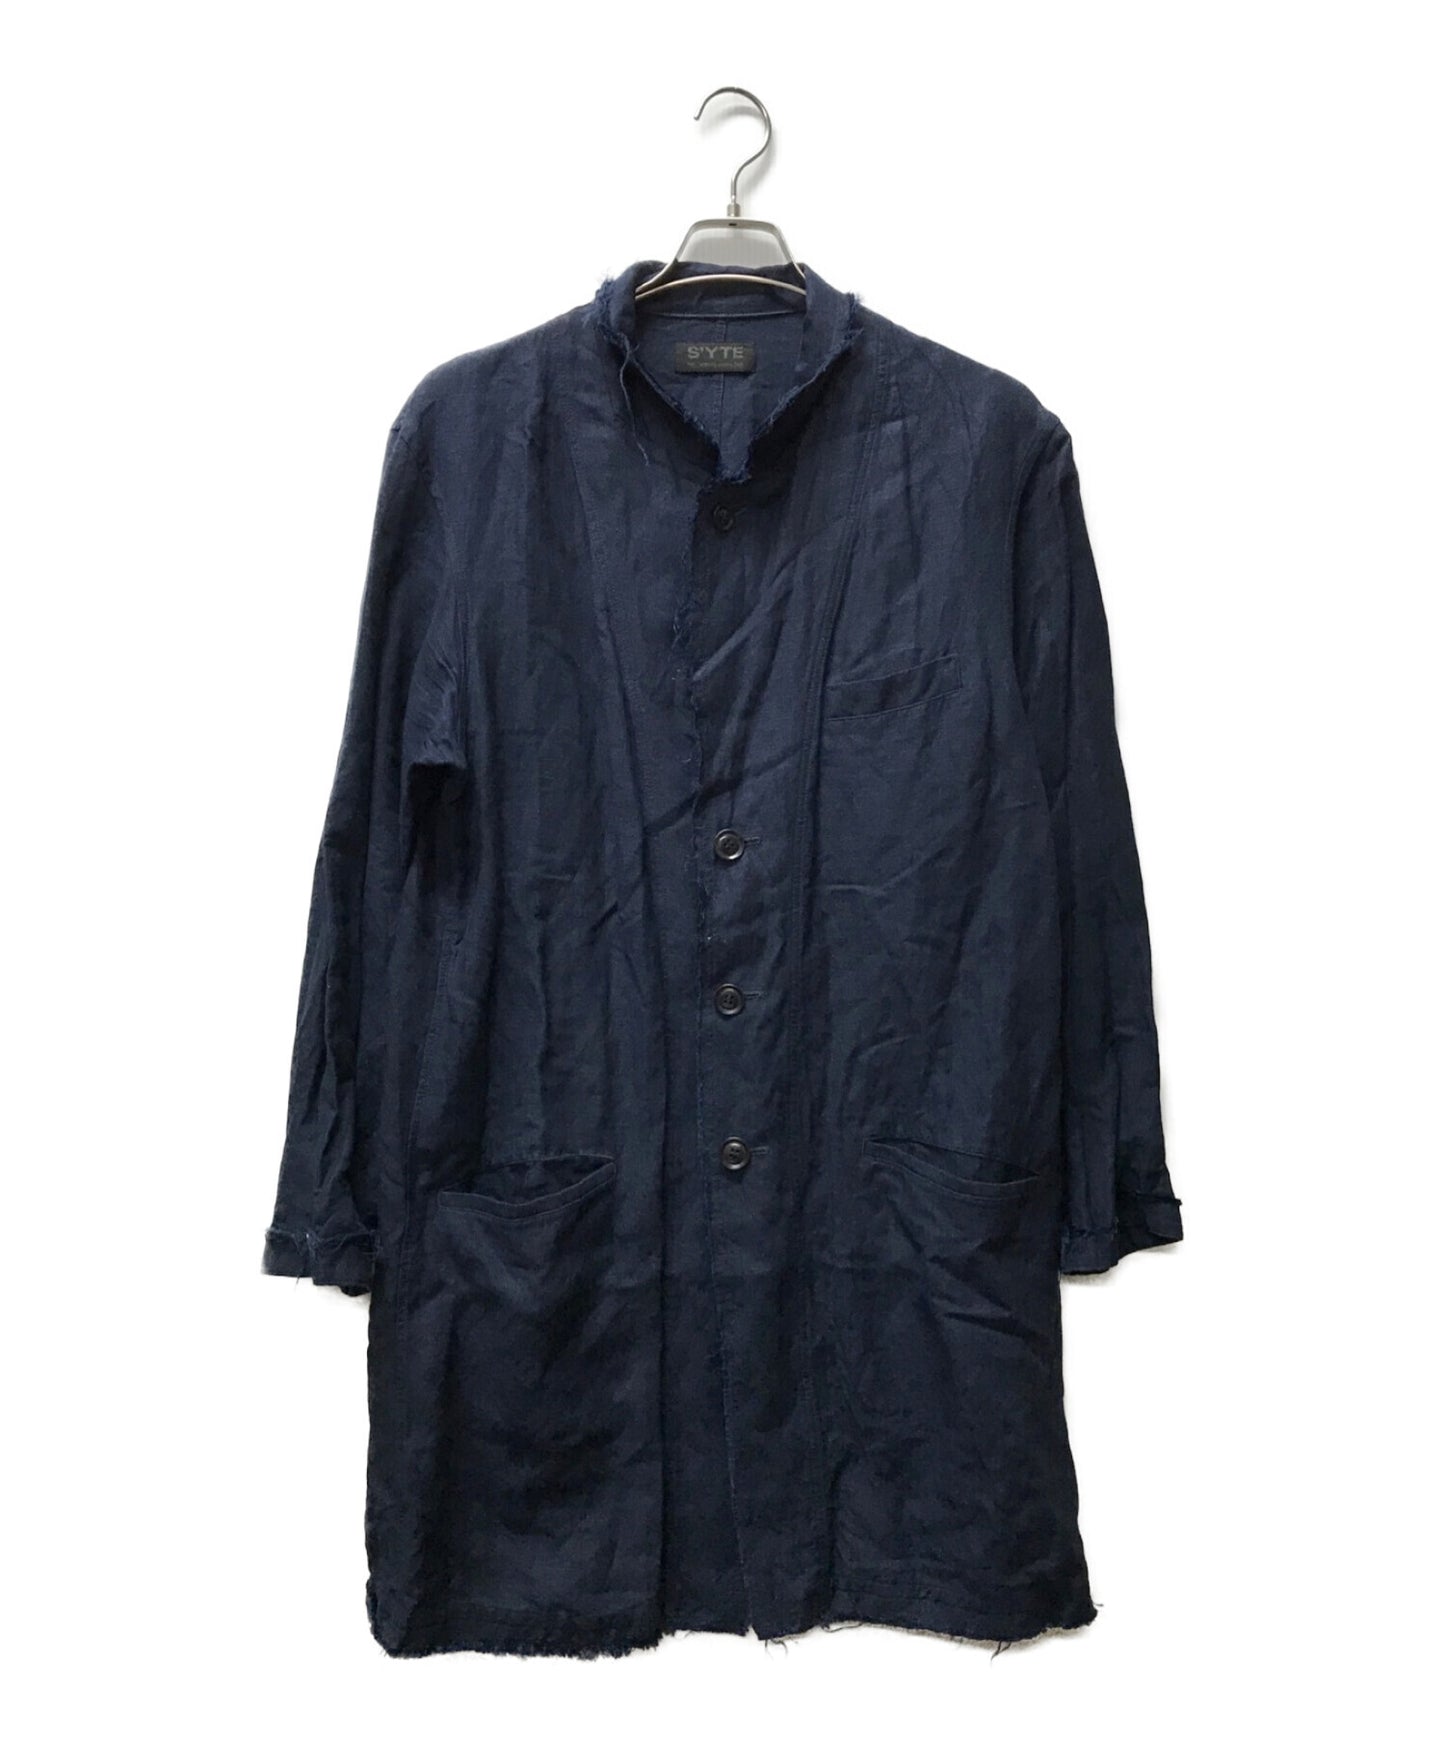 [Pre-owned] s'yte Linen rayon spring coat UH-J09-300